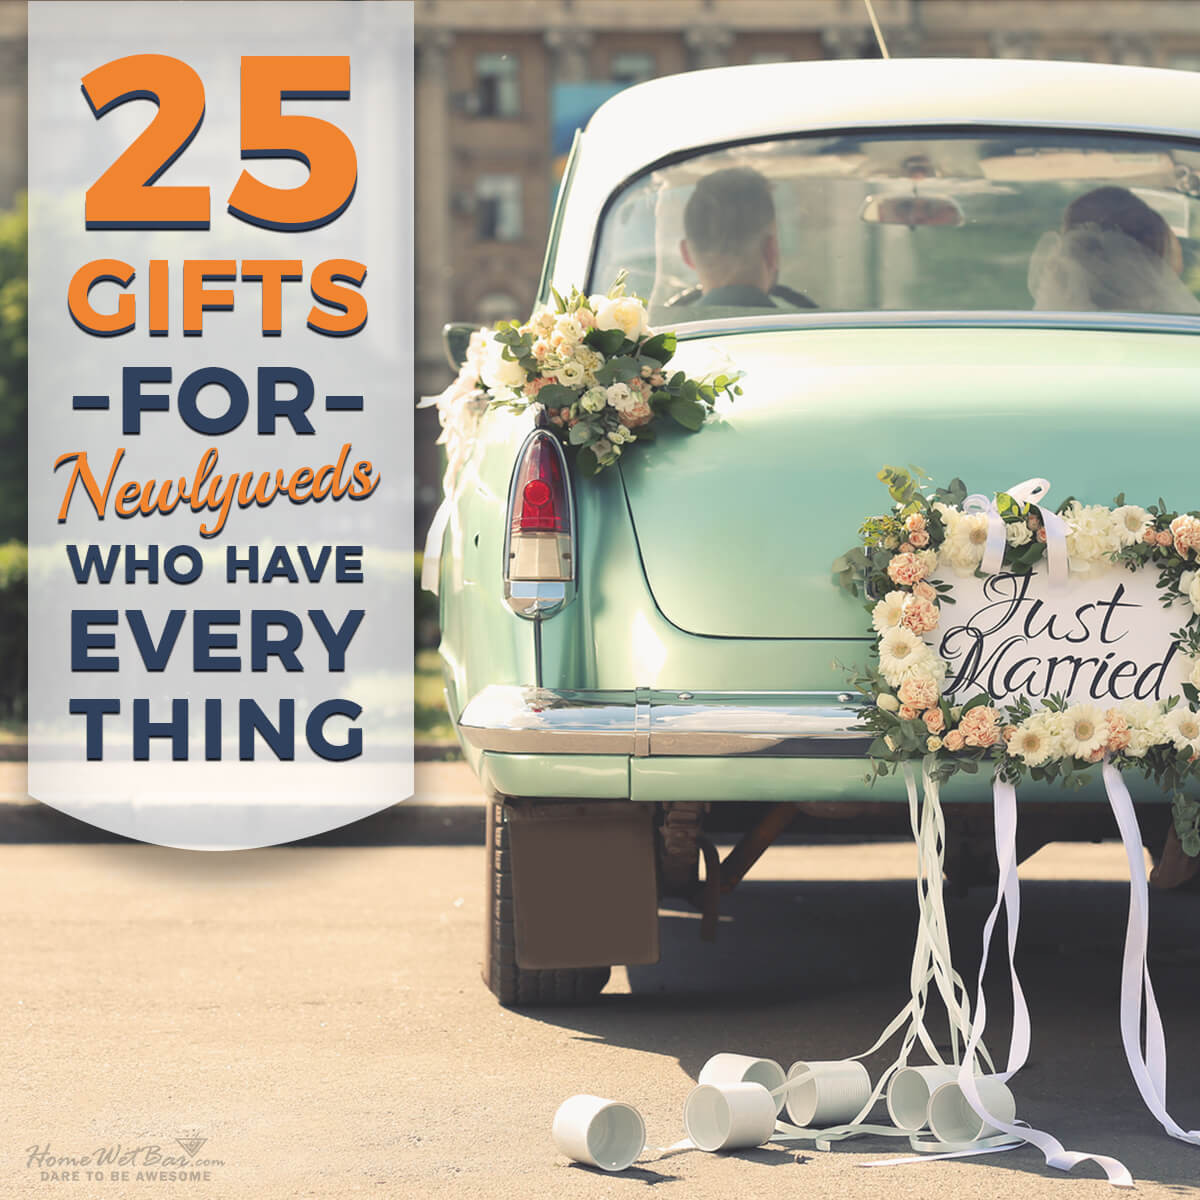 Good Gift Ideas For Couples
 25 Gifts for Newlyweds Who Have Everything